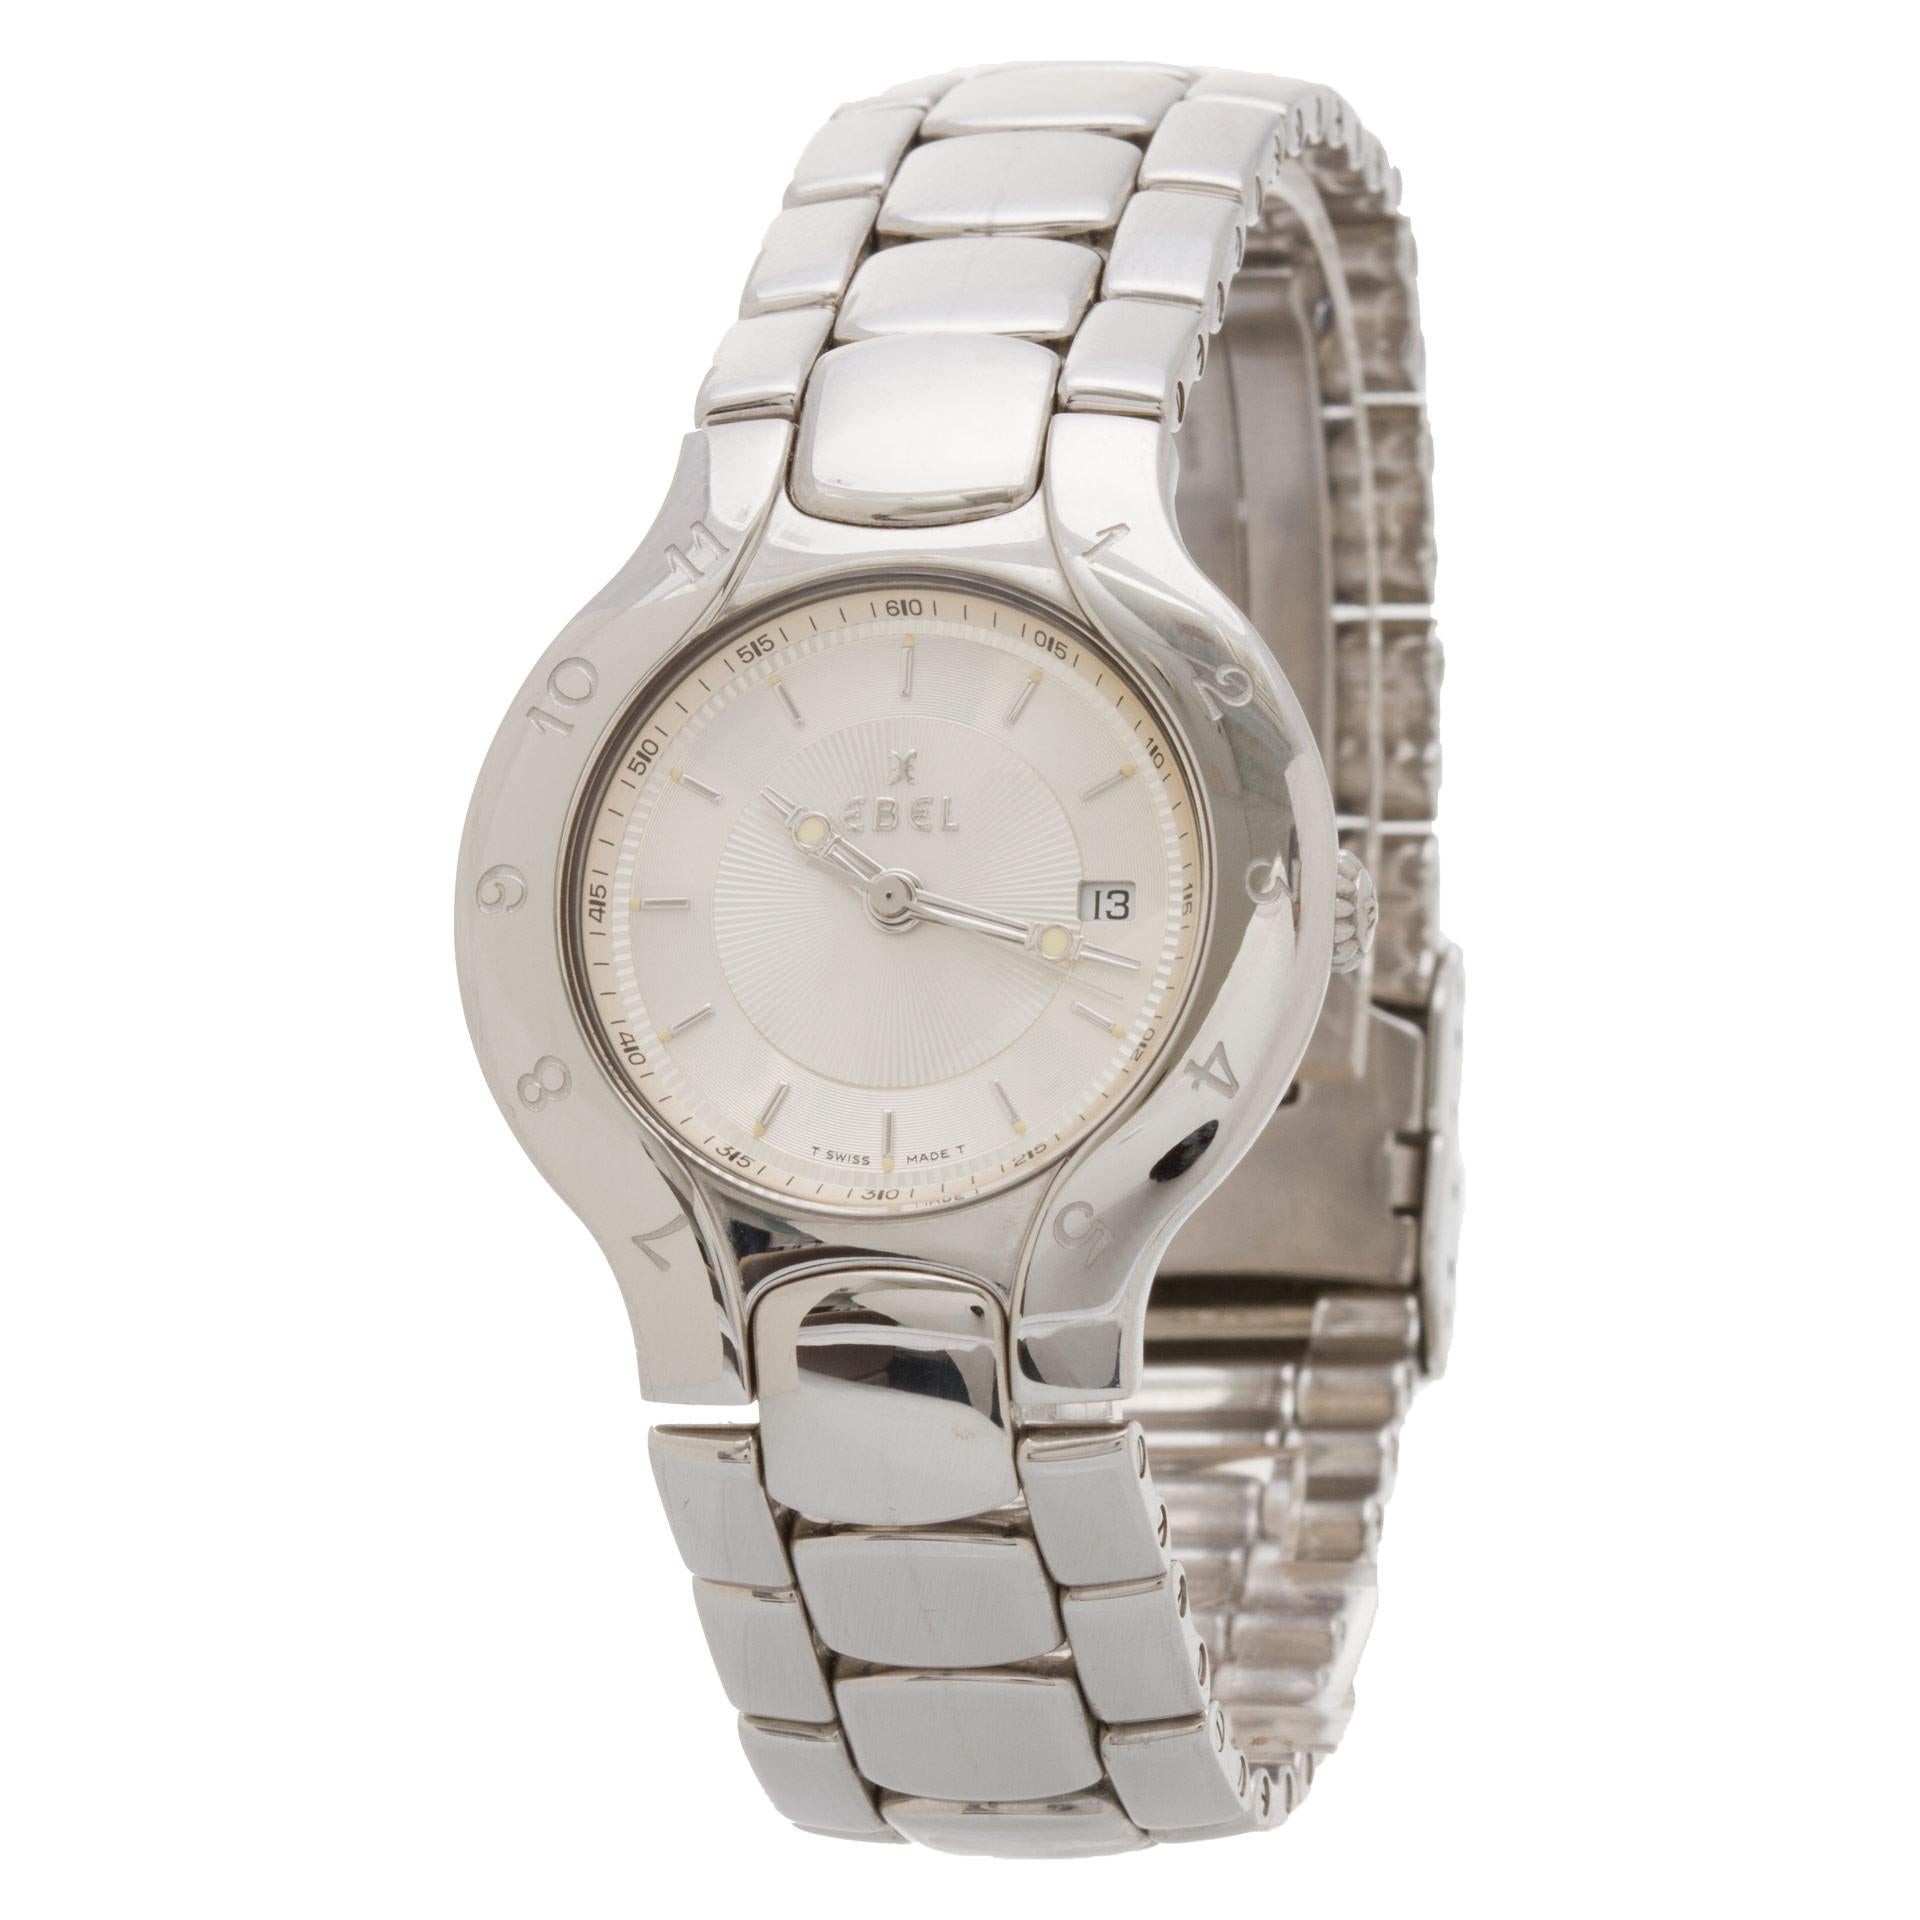 Gents Ebel Lichine in stainless steel. Quartz w/ date, sweep seconds. With box. Ref 09087970. Fine Pre-owned Ebel Watch.

Certified preowned Classic Ebel Lichine 09087970 watch is made out of Stainless steel on a Stainless Steel bracelet with a